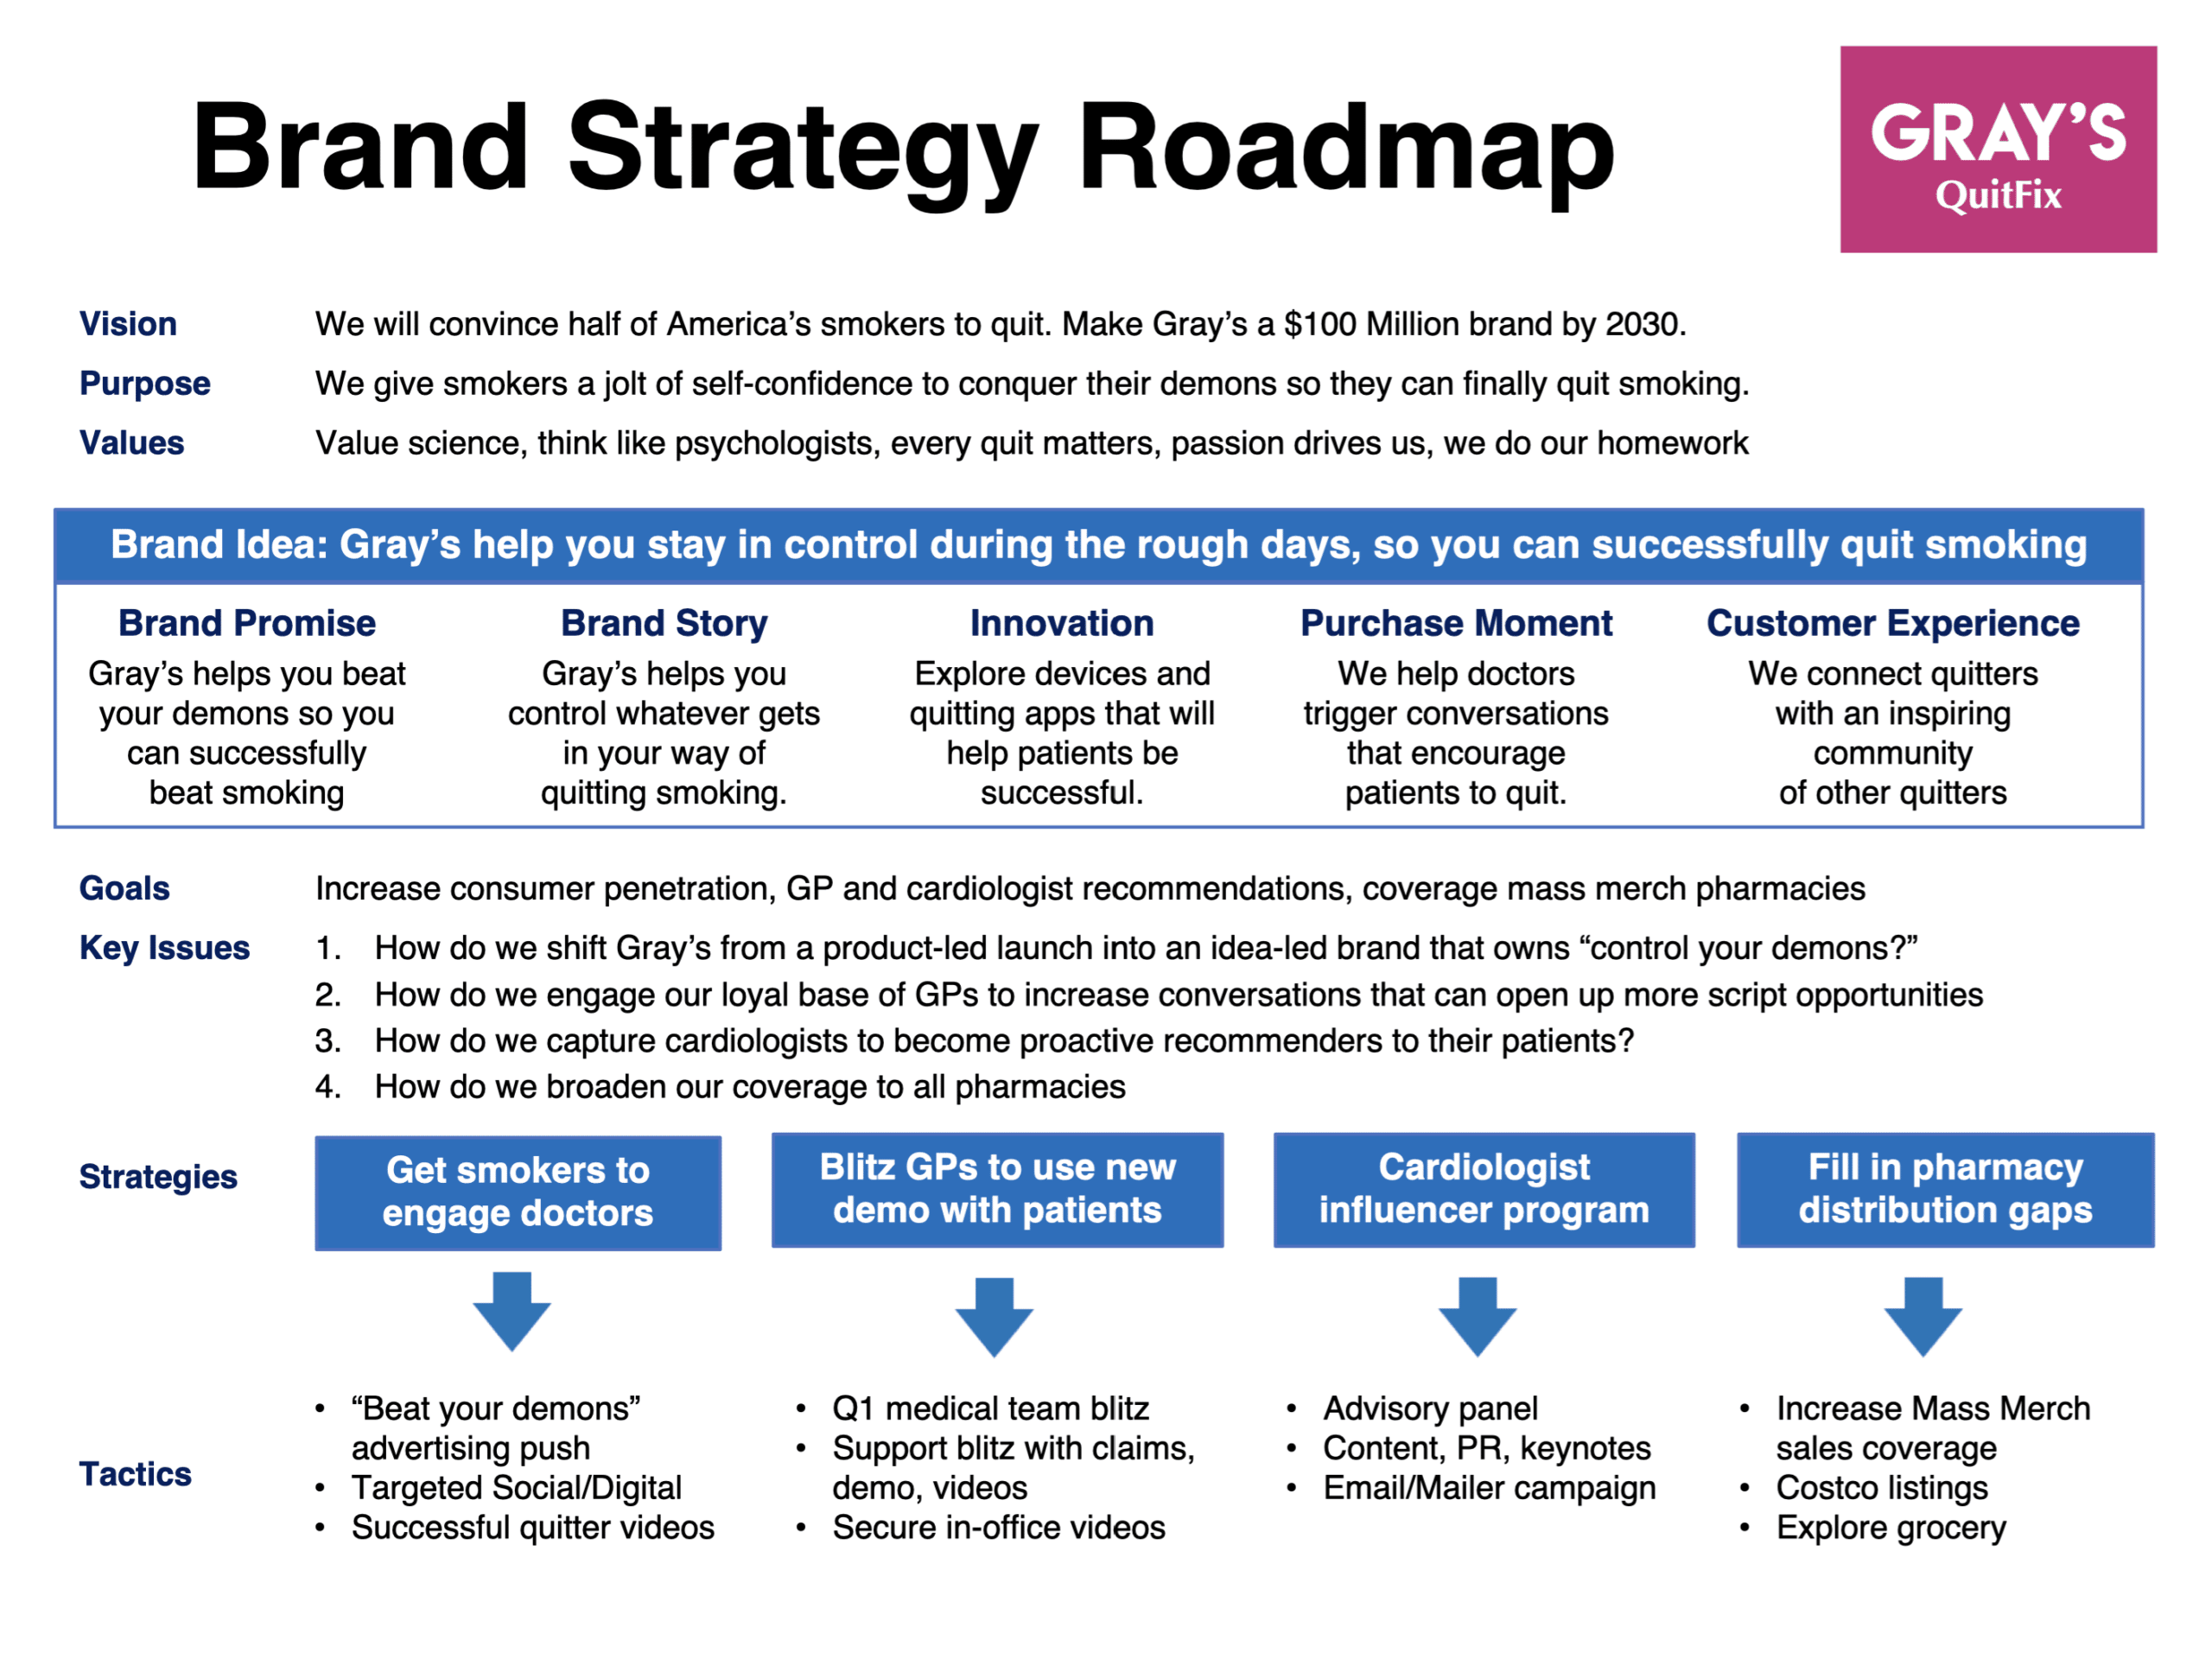 Brand Strategy Roadmap for consumer Healthcare brands